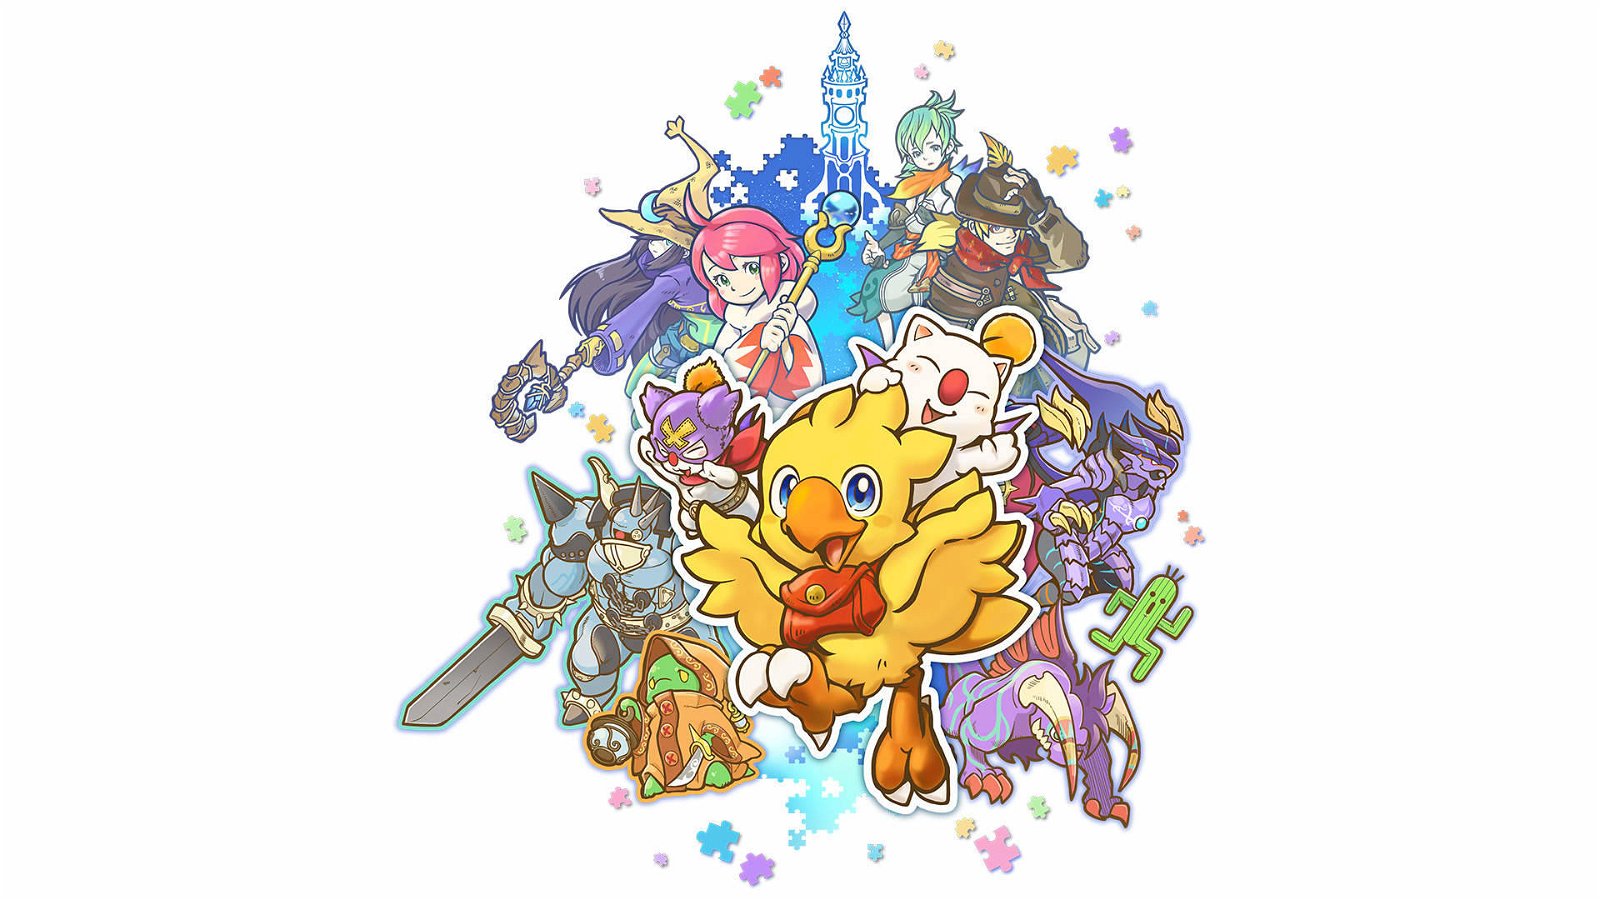 Immagine di Chocobo’s Mystery Dungeon EVERY BUDDY, recensione